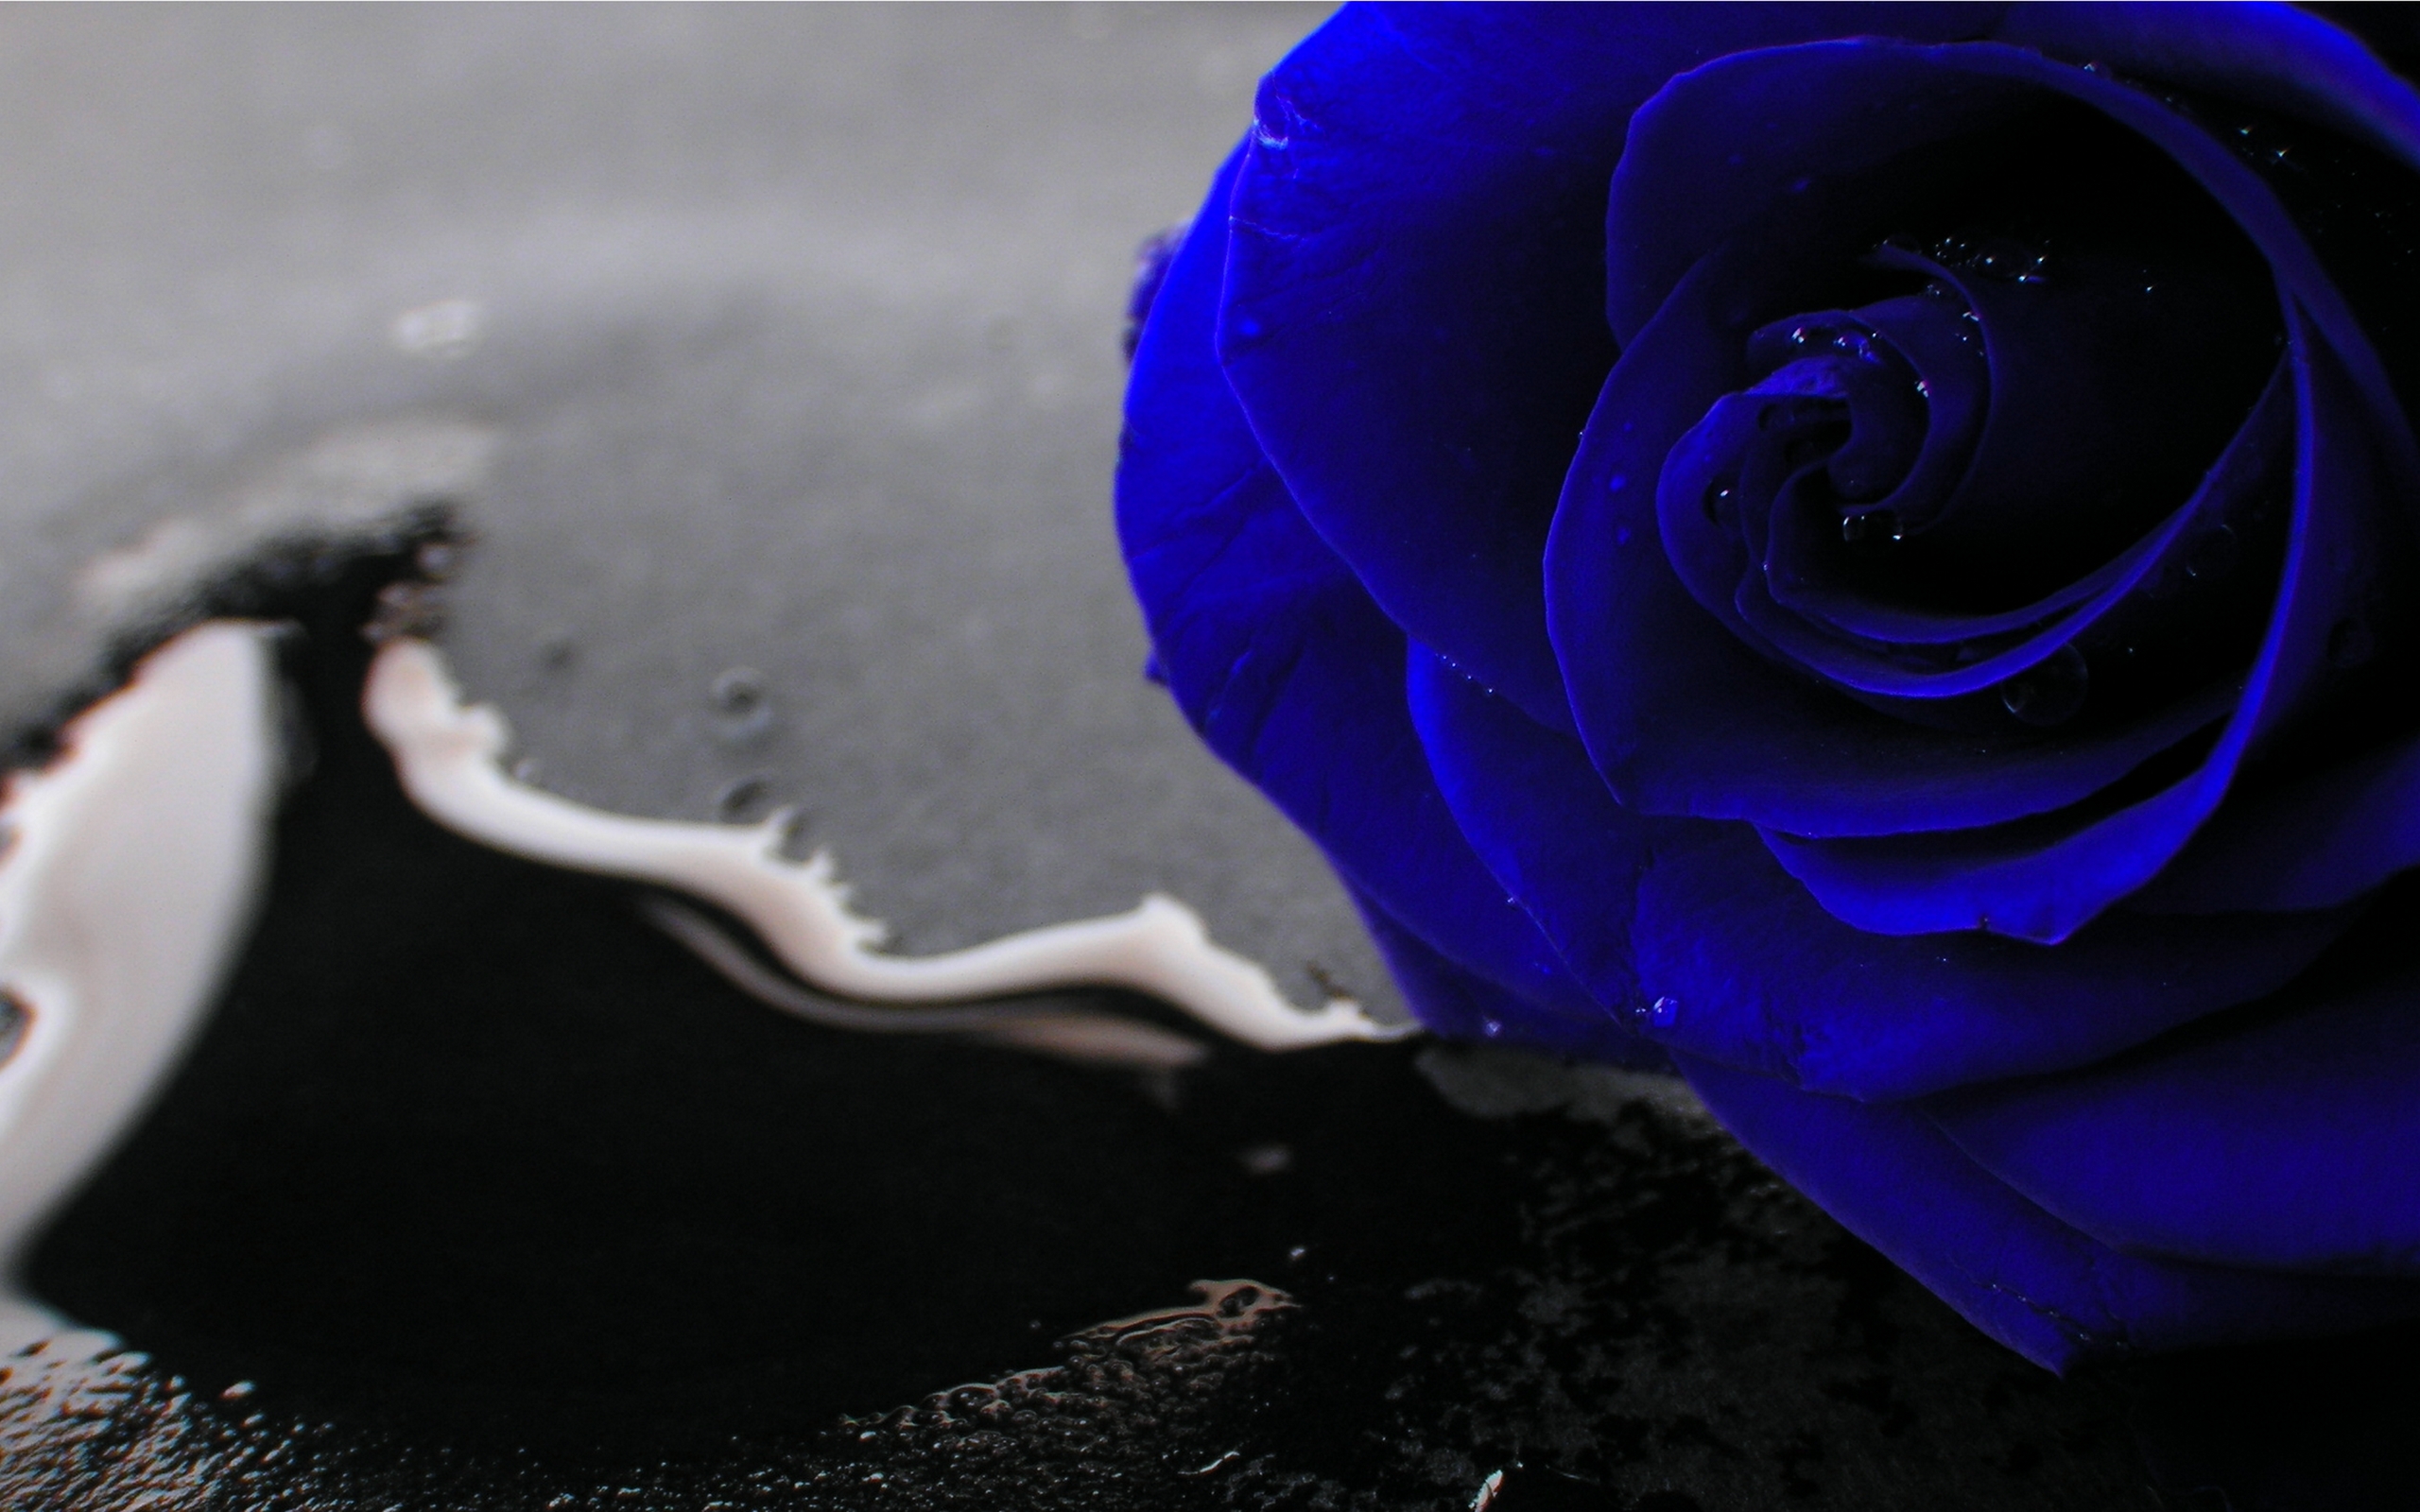 Blue Rose Wallpaper Image Photos Pictures Background